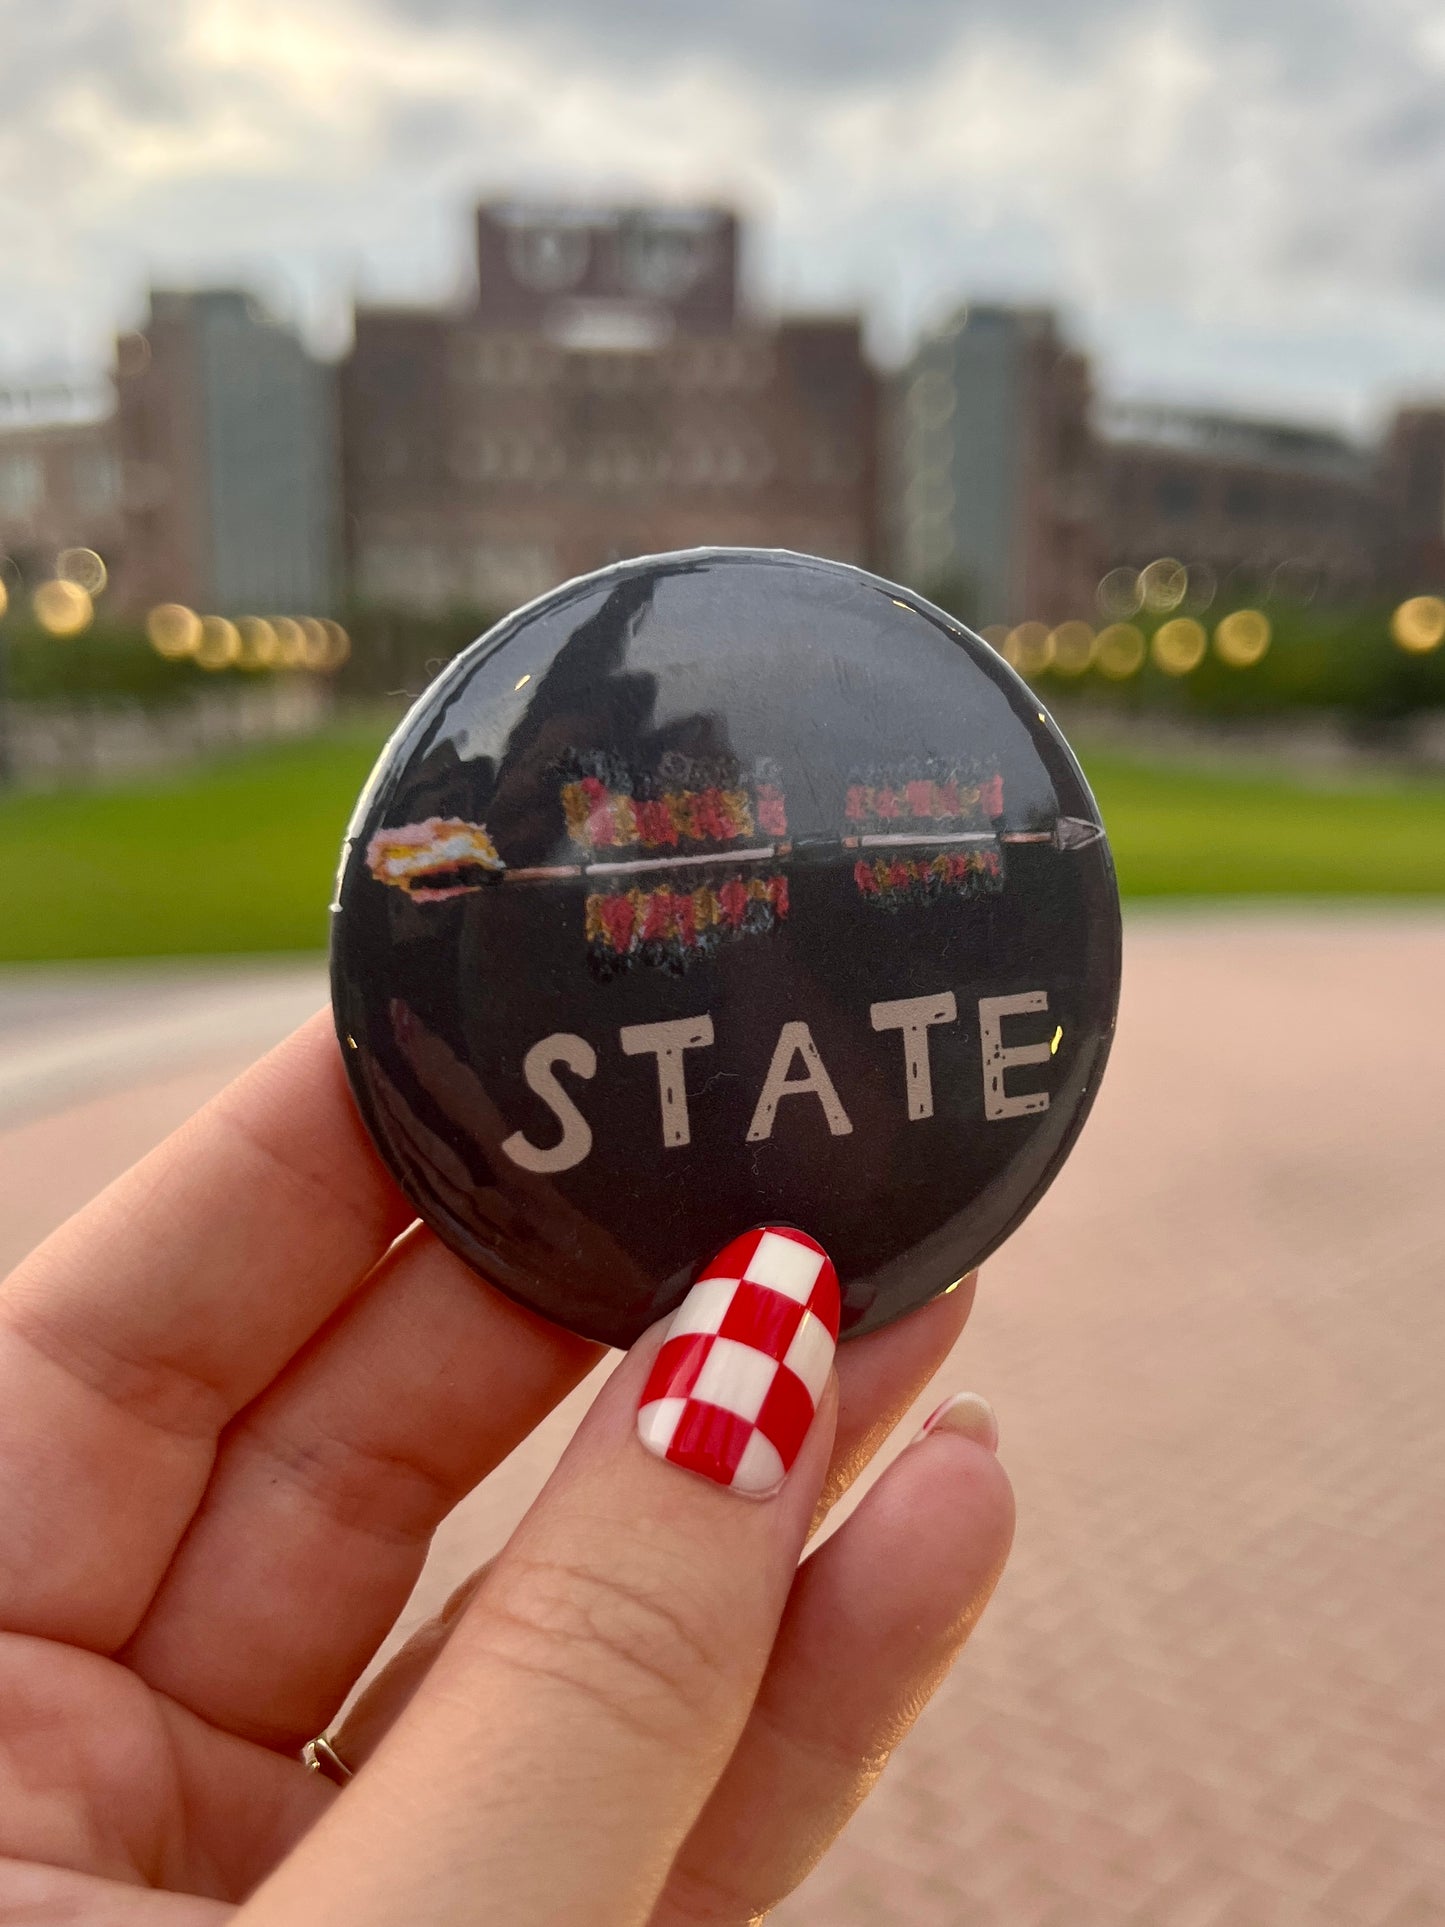 Florida State University “STATE” spear button